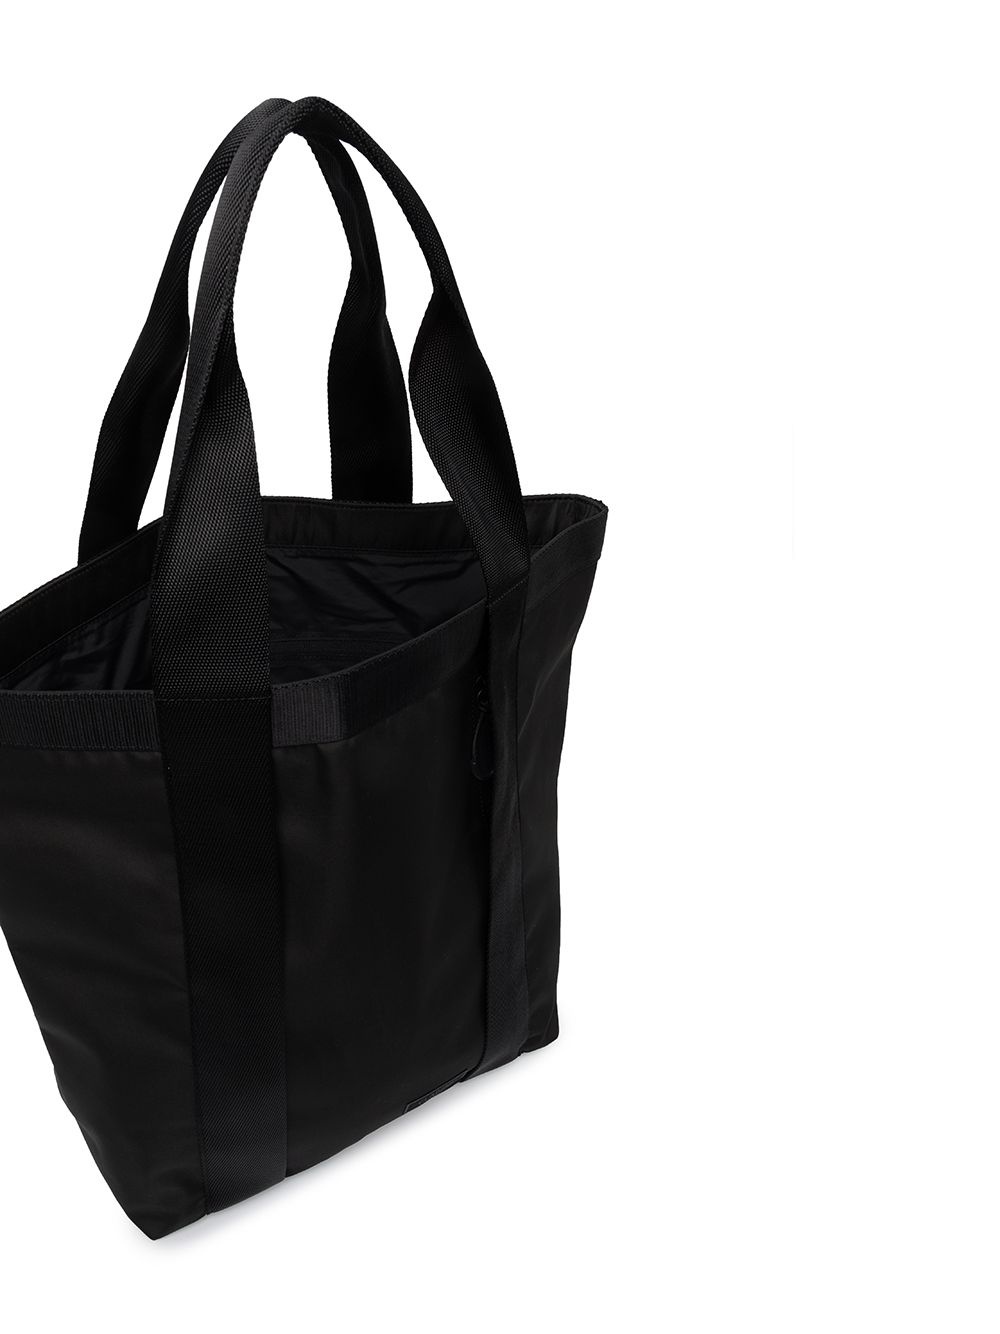 large recycled tote bag - 5